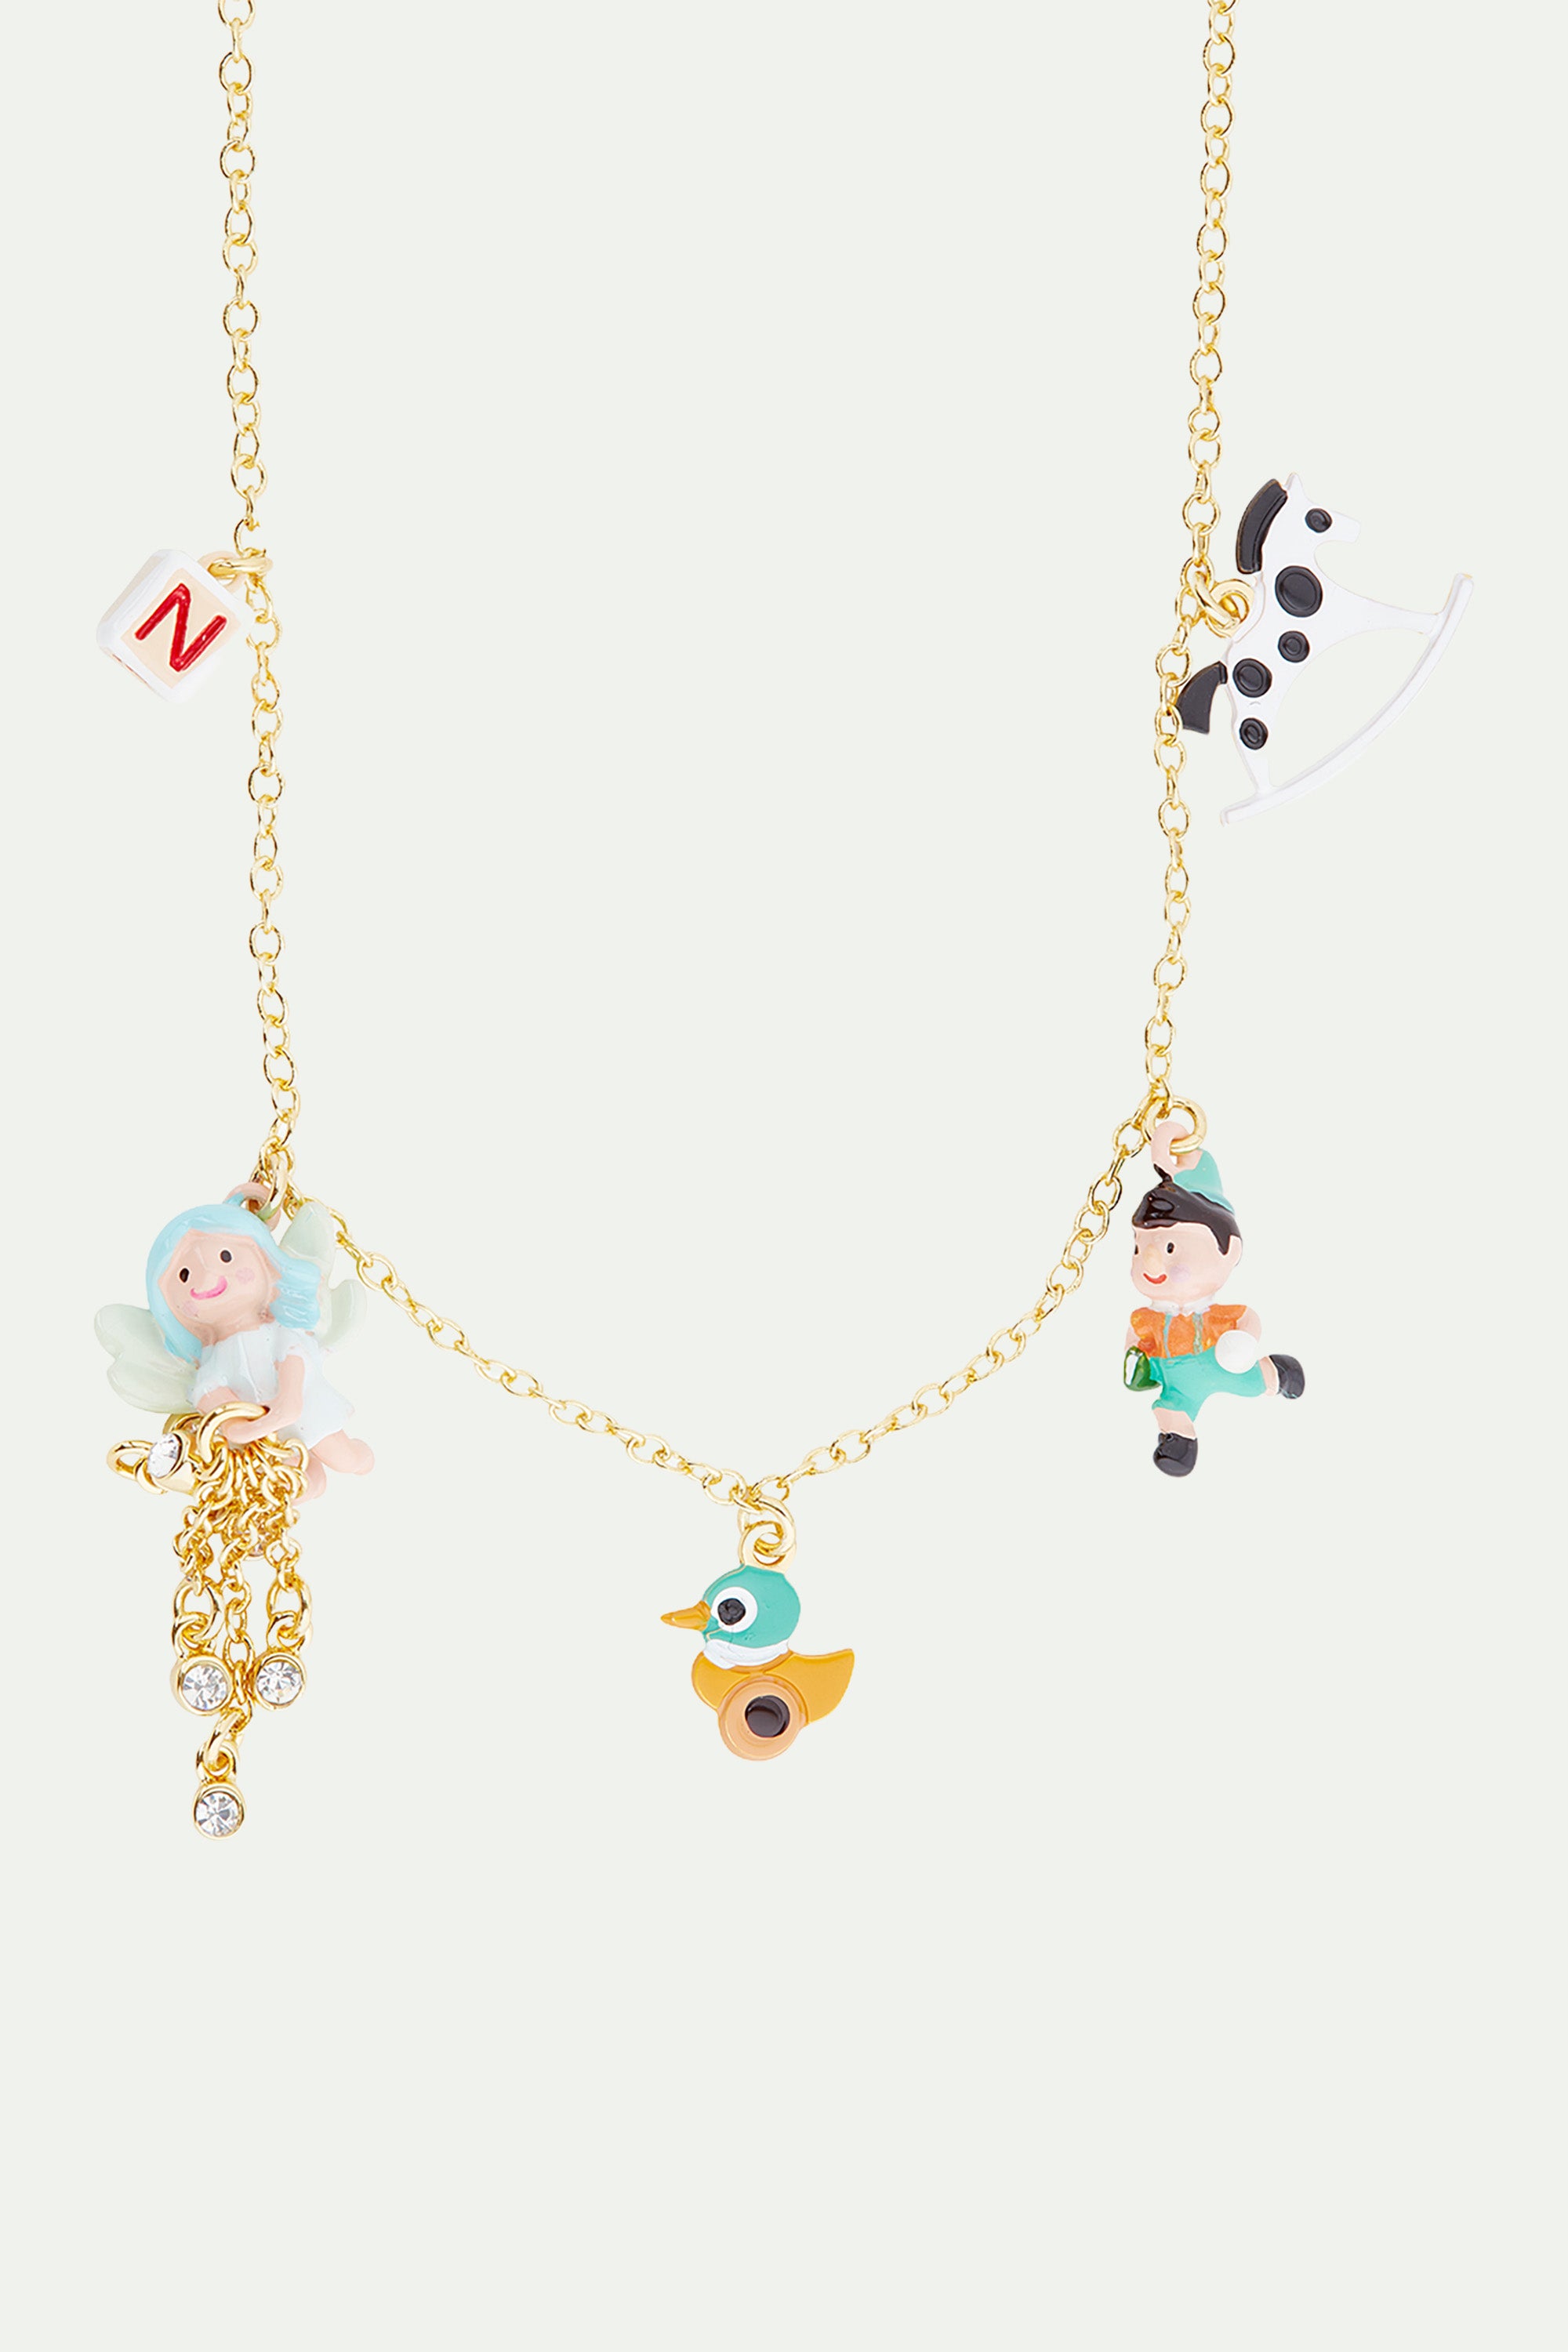 Pinocchio and magical world charm necklace